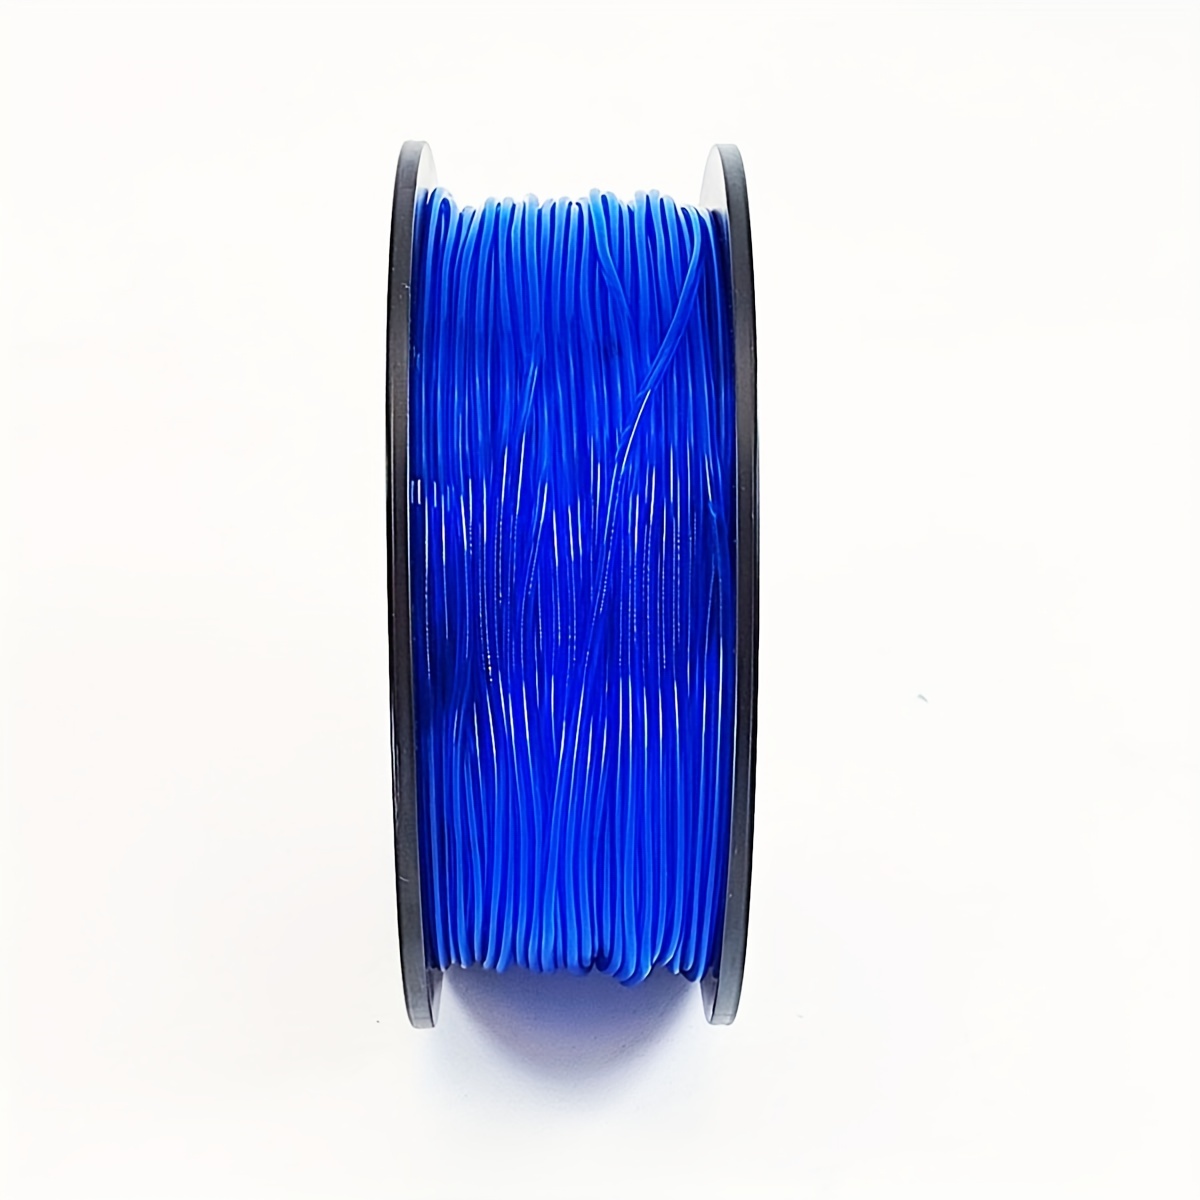 EasyThreed TPU Flexible Filament Combo 3 pieces 250g Length 80M 1.75mm Soft  3D Printing material